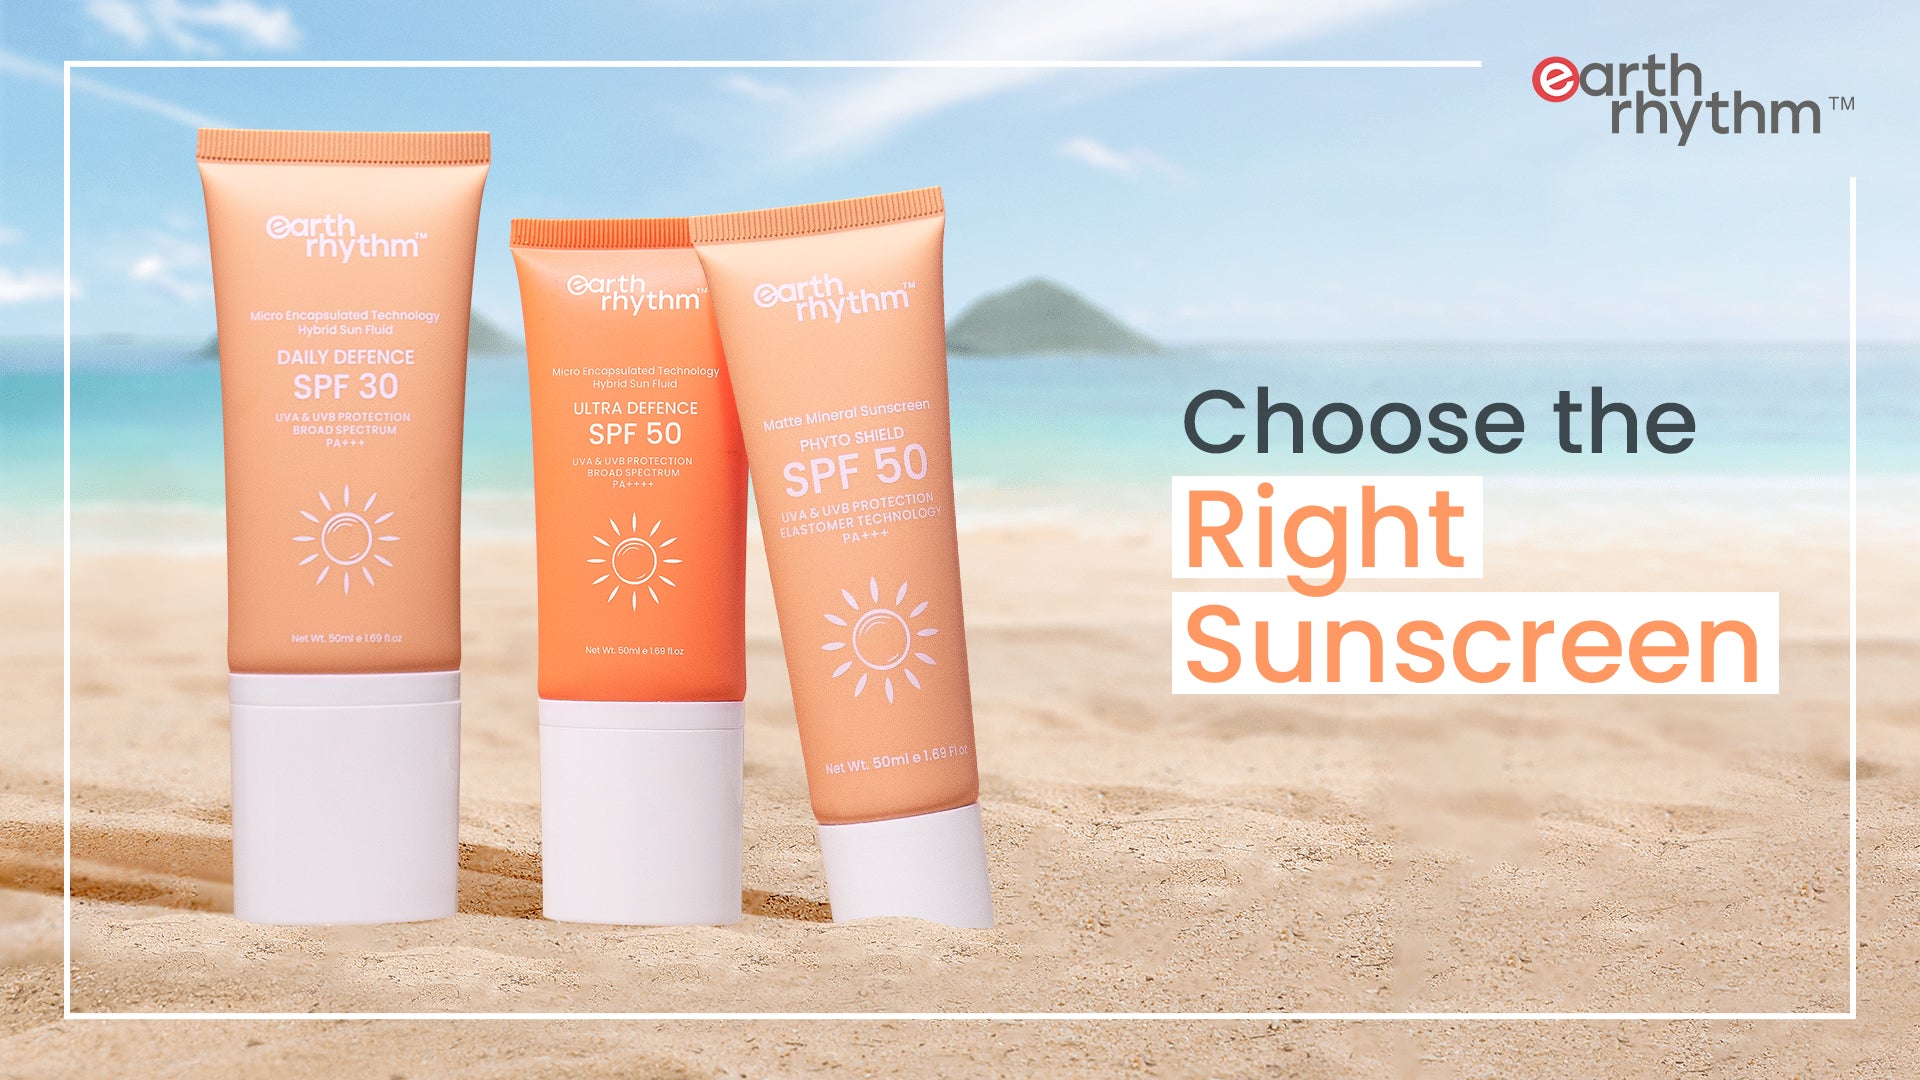 How to Choose the Right Sunscreen for Your Skin?